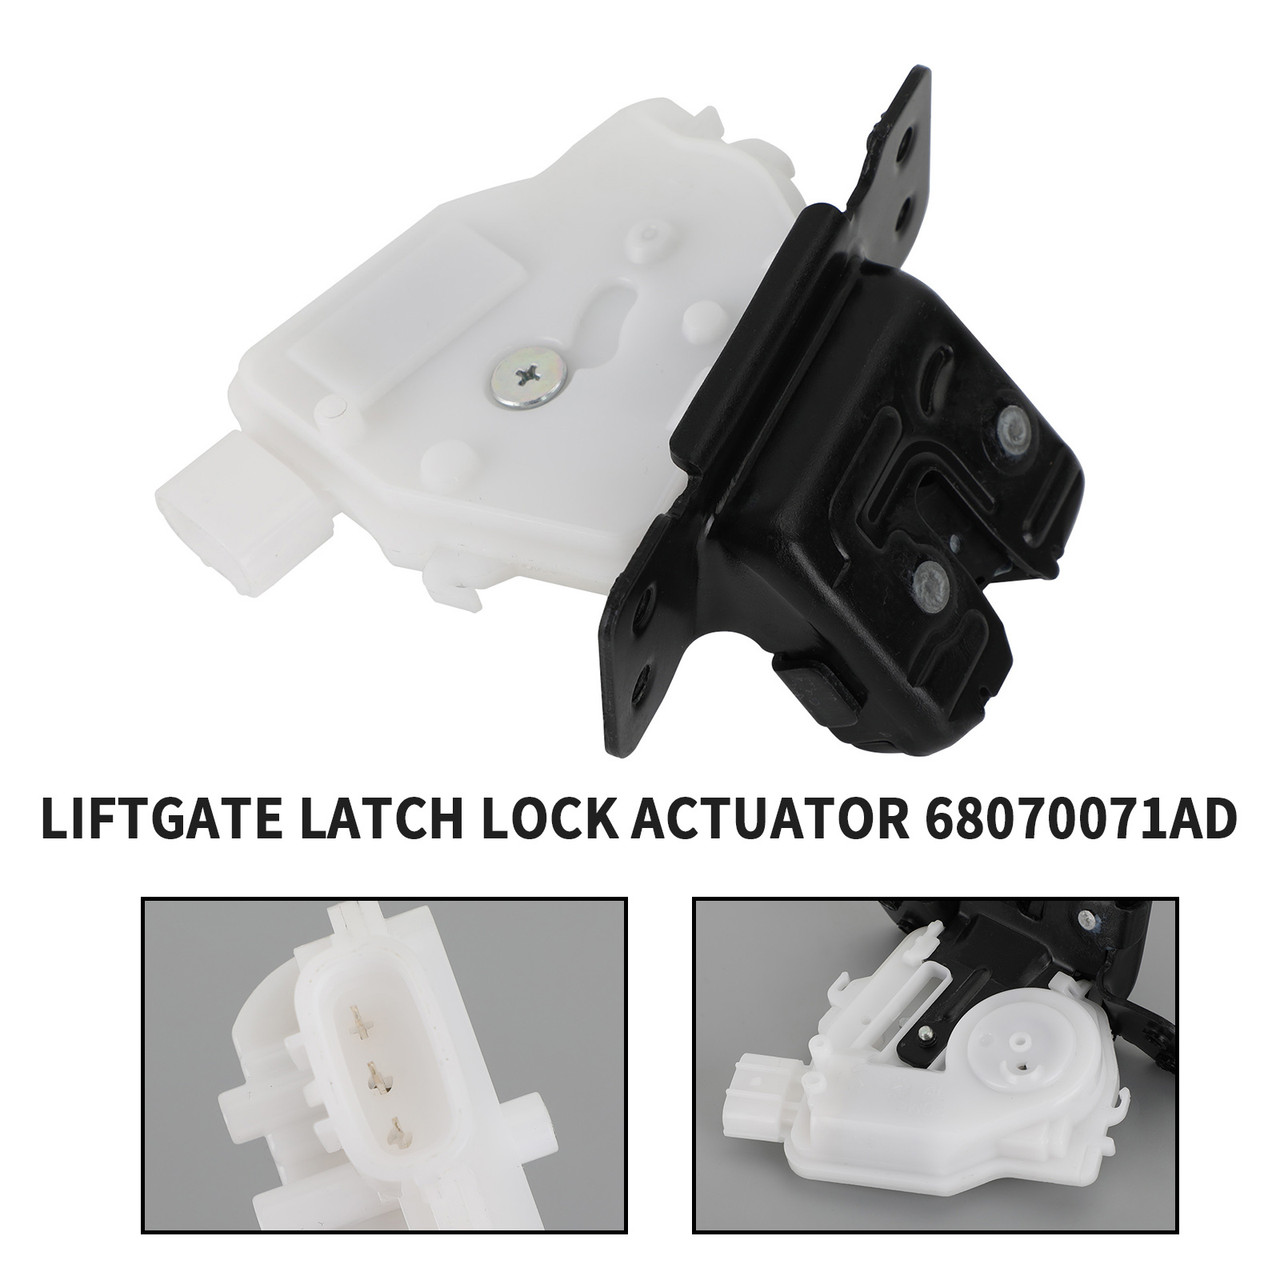 Liftgate Latch Lock Actuator 68070071AD For Fiat 500 Abarth Hatchback 2012-2019